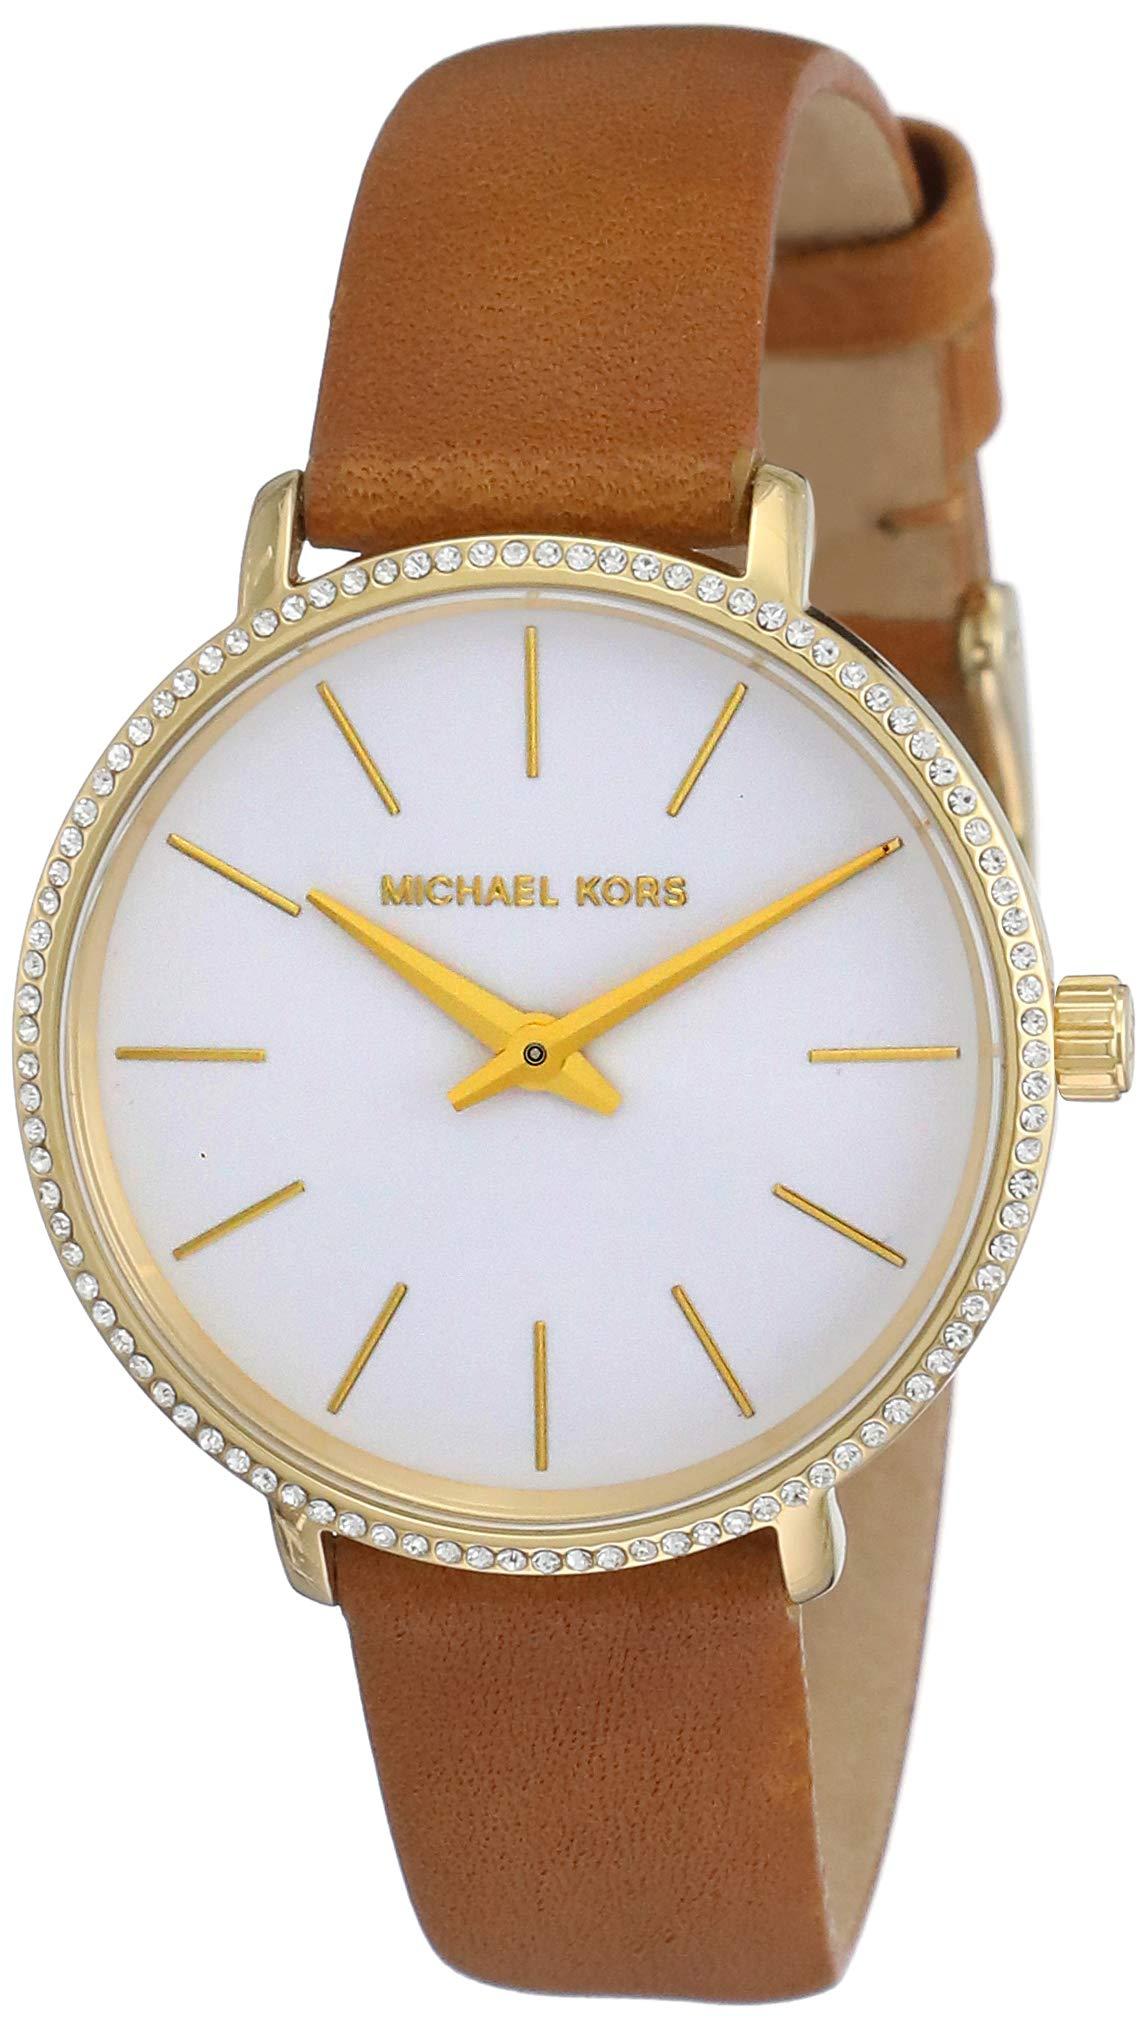 michael kors women's stainless steel quartz watch with leather calfskin strap